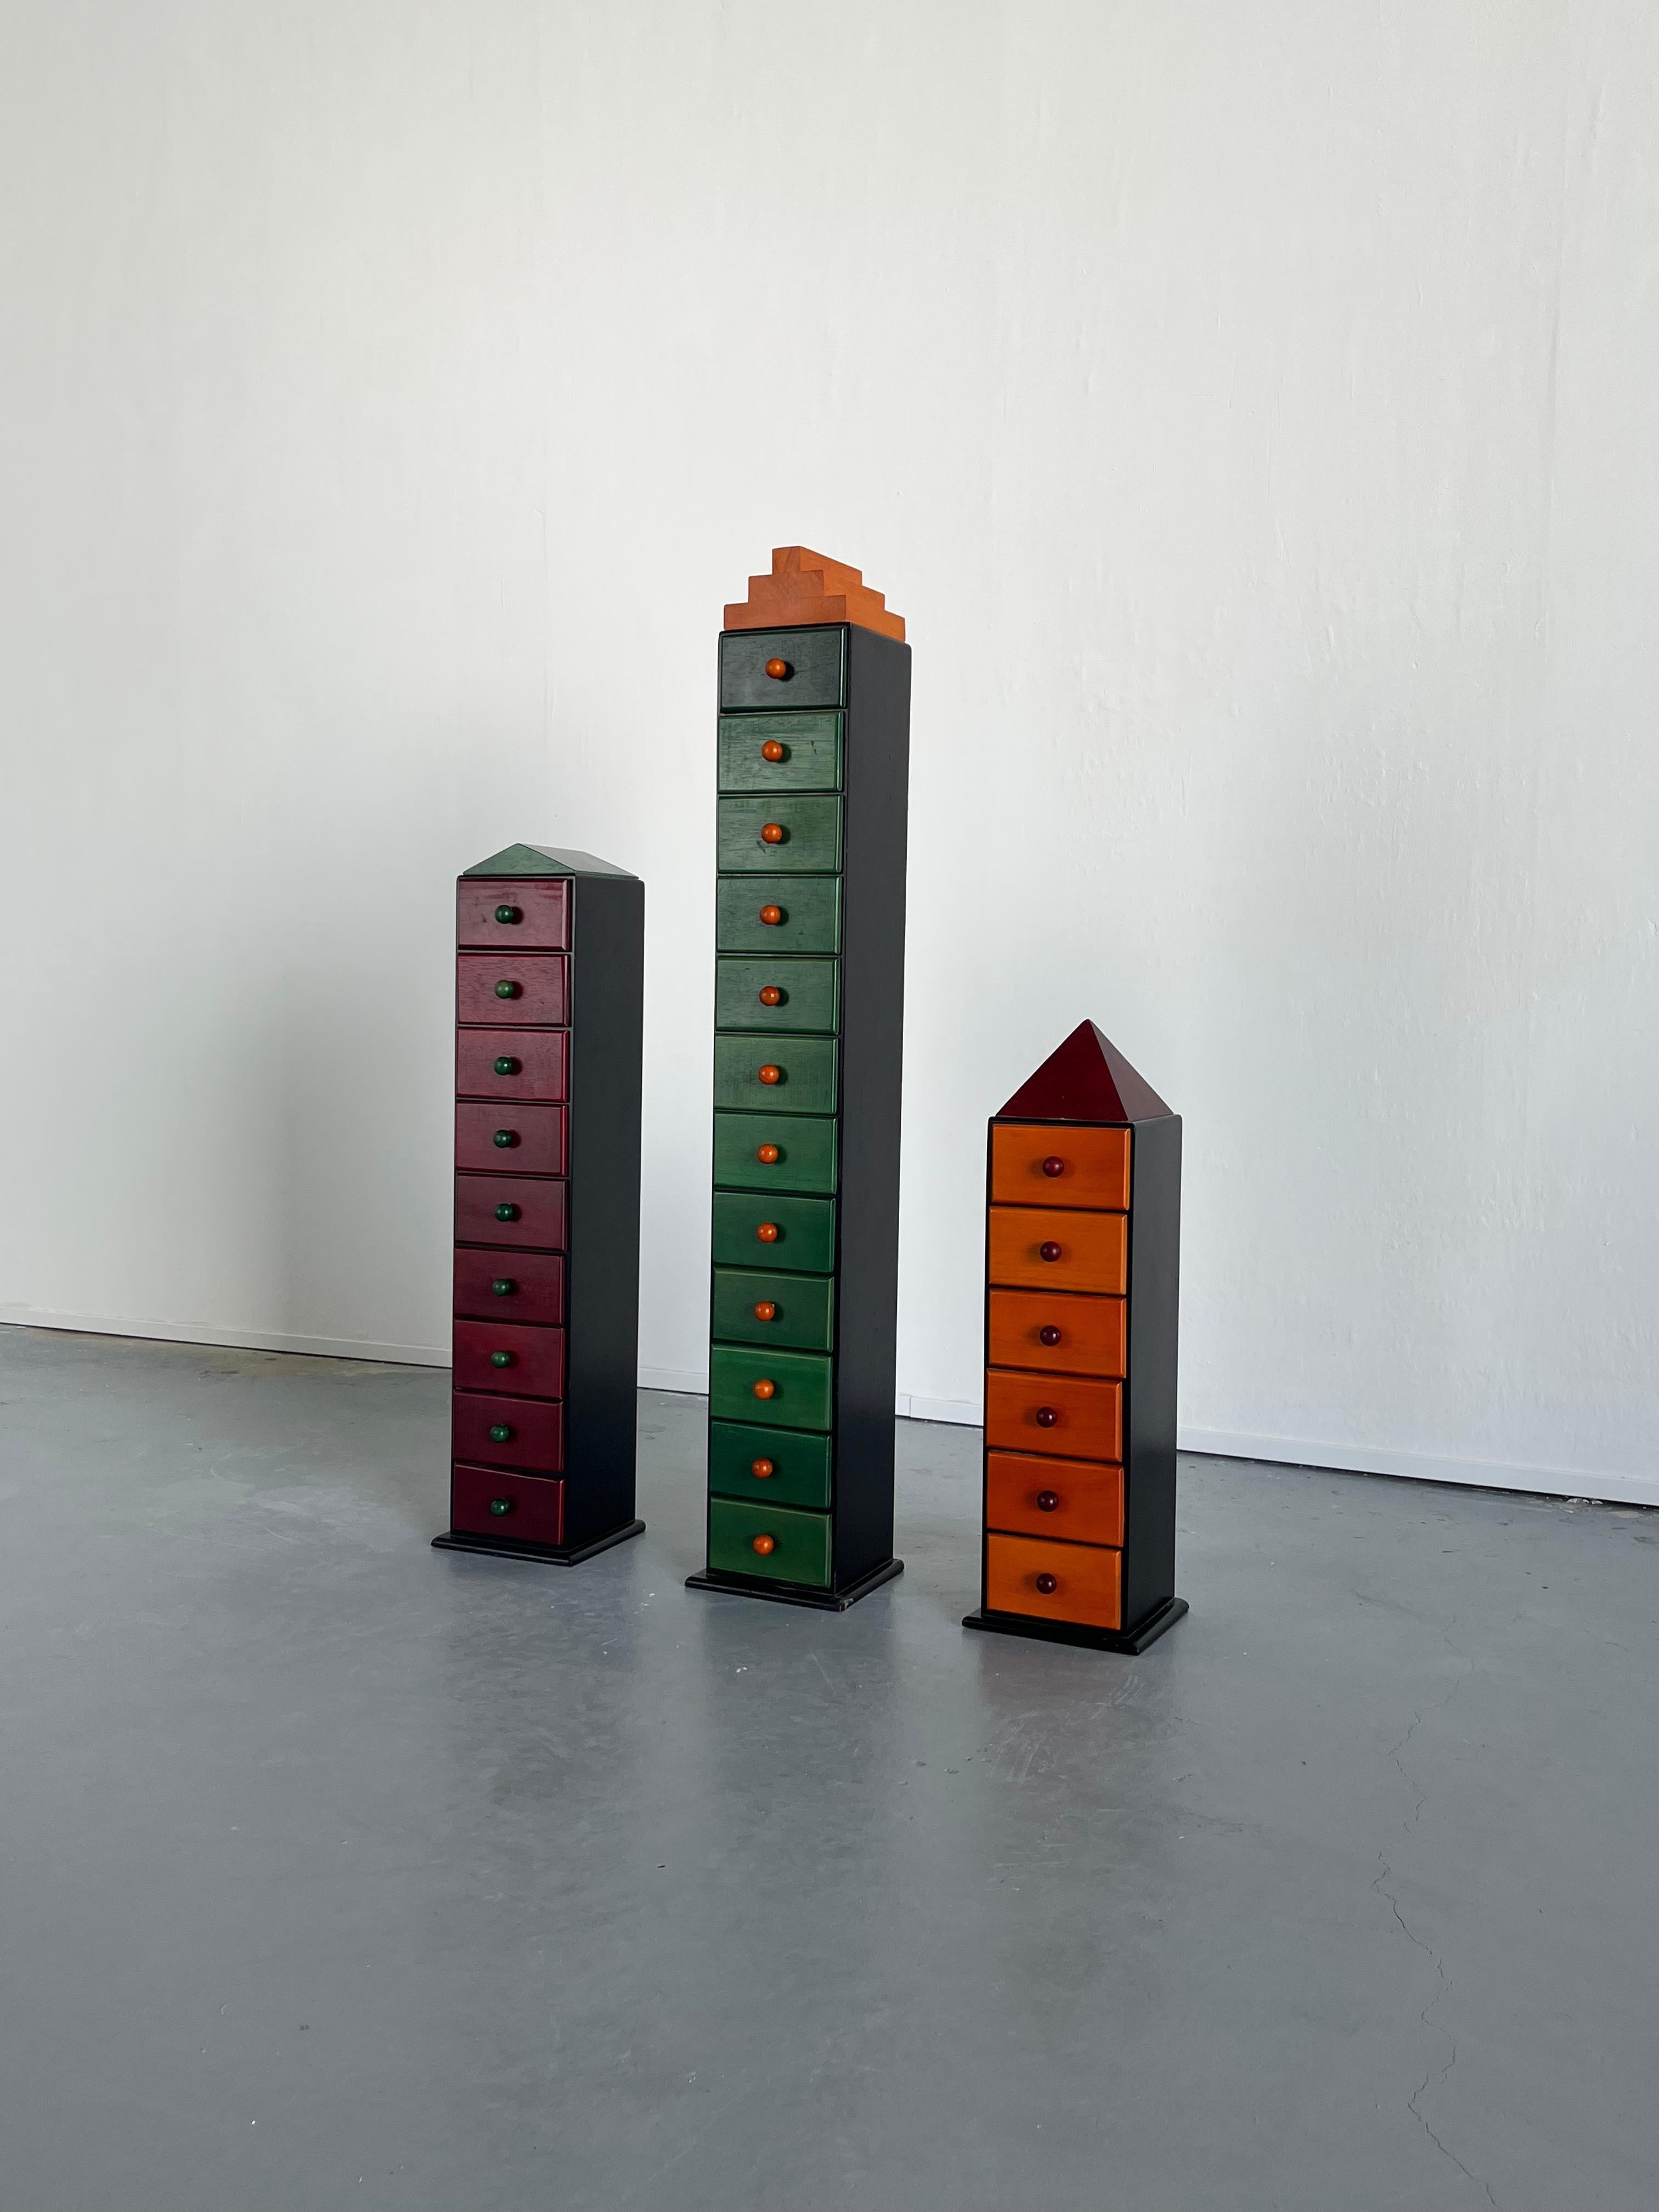 Set of three unique vintage postmodern storage cabinets following the Memphis Milano style, produced in The Netherlands in the 1970s.
The set can serve as a unique postmodern Memphis decoration or storage cabinets featuring a total of 27 small